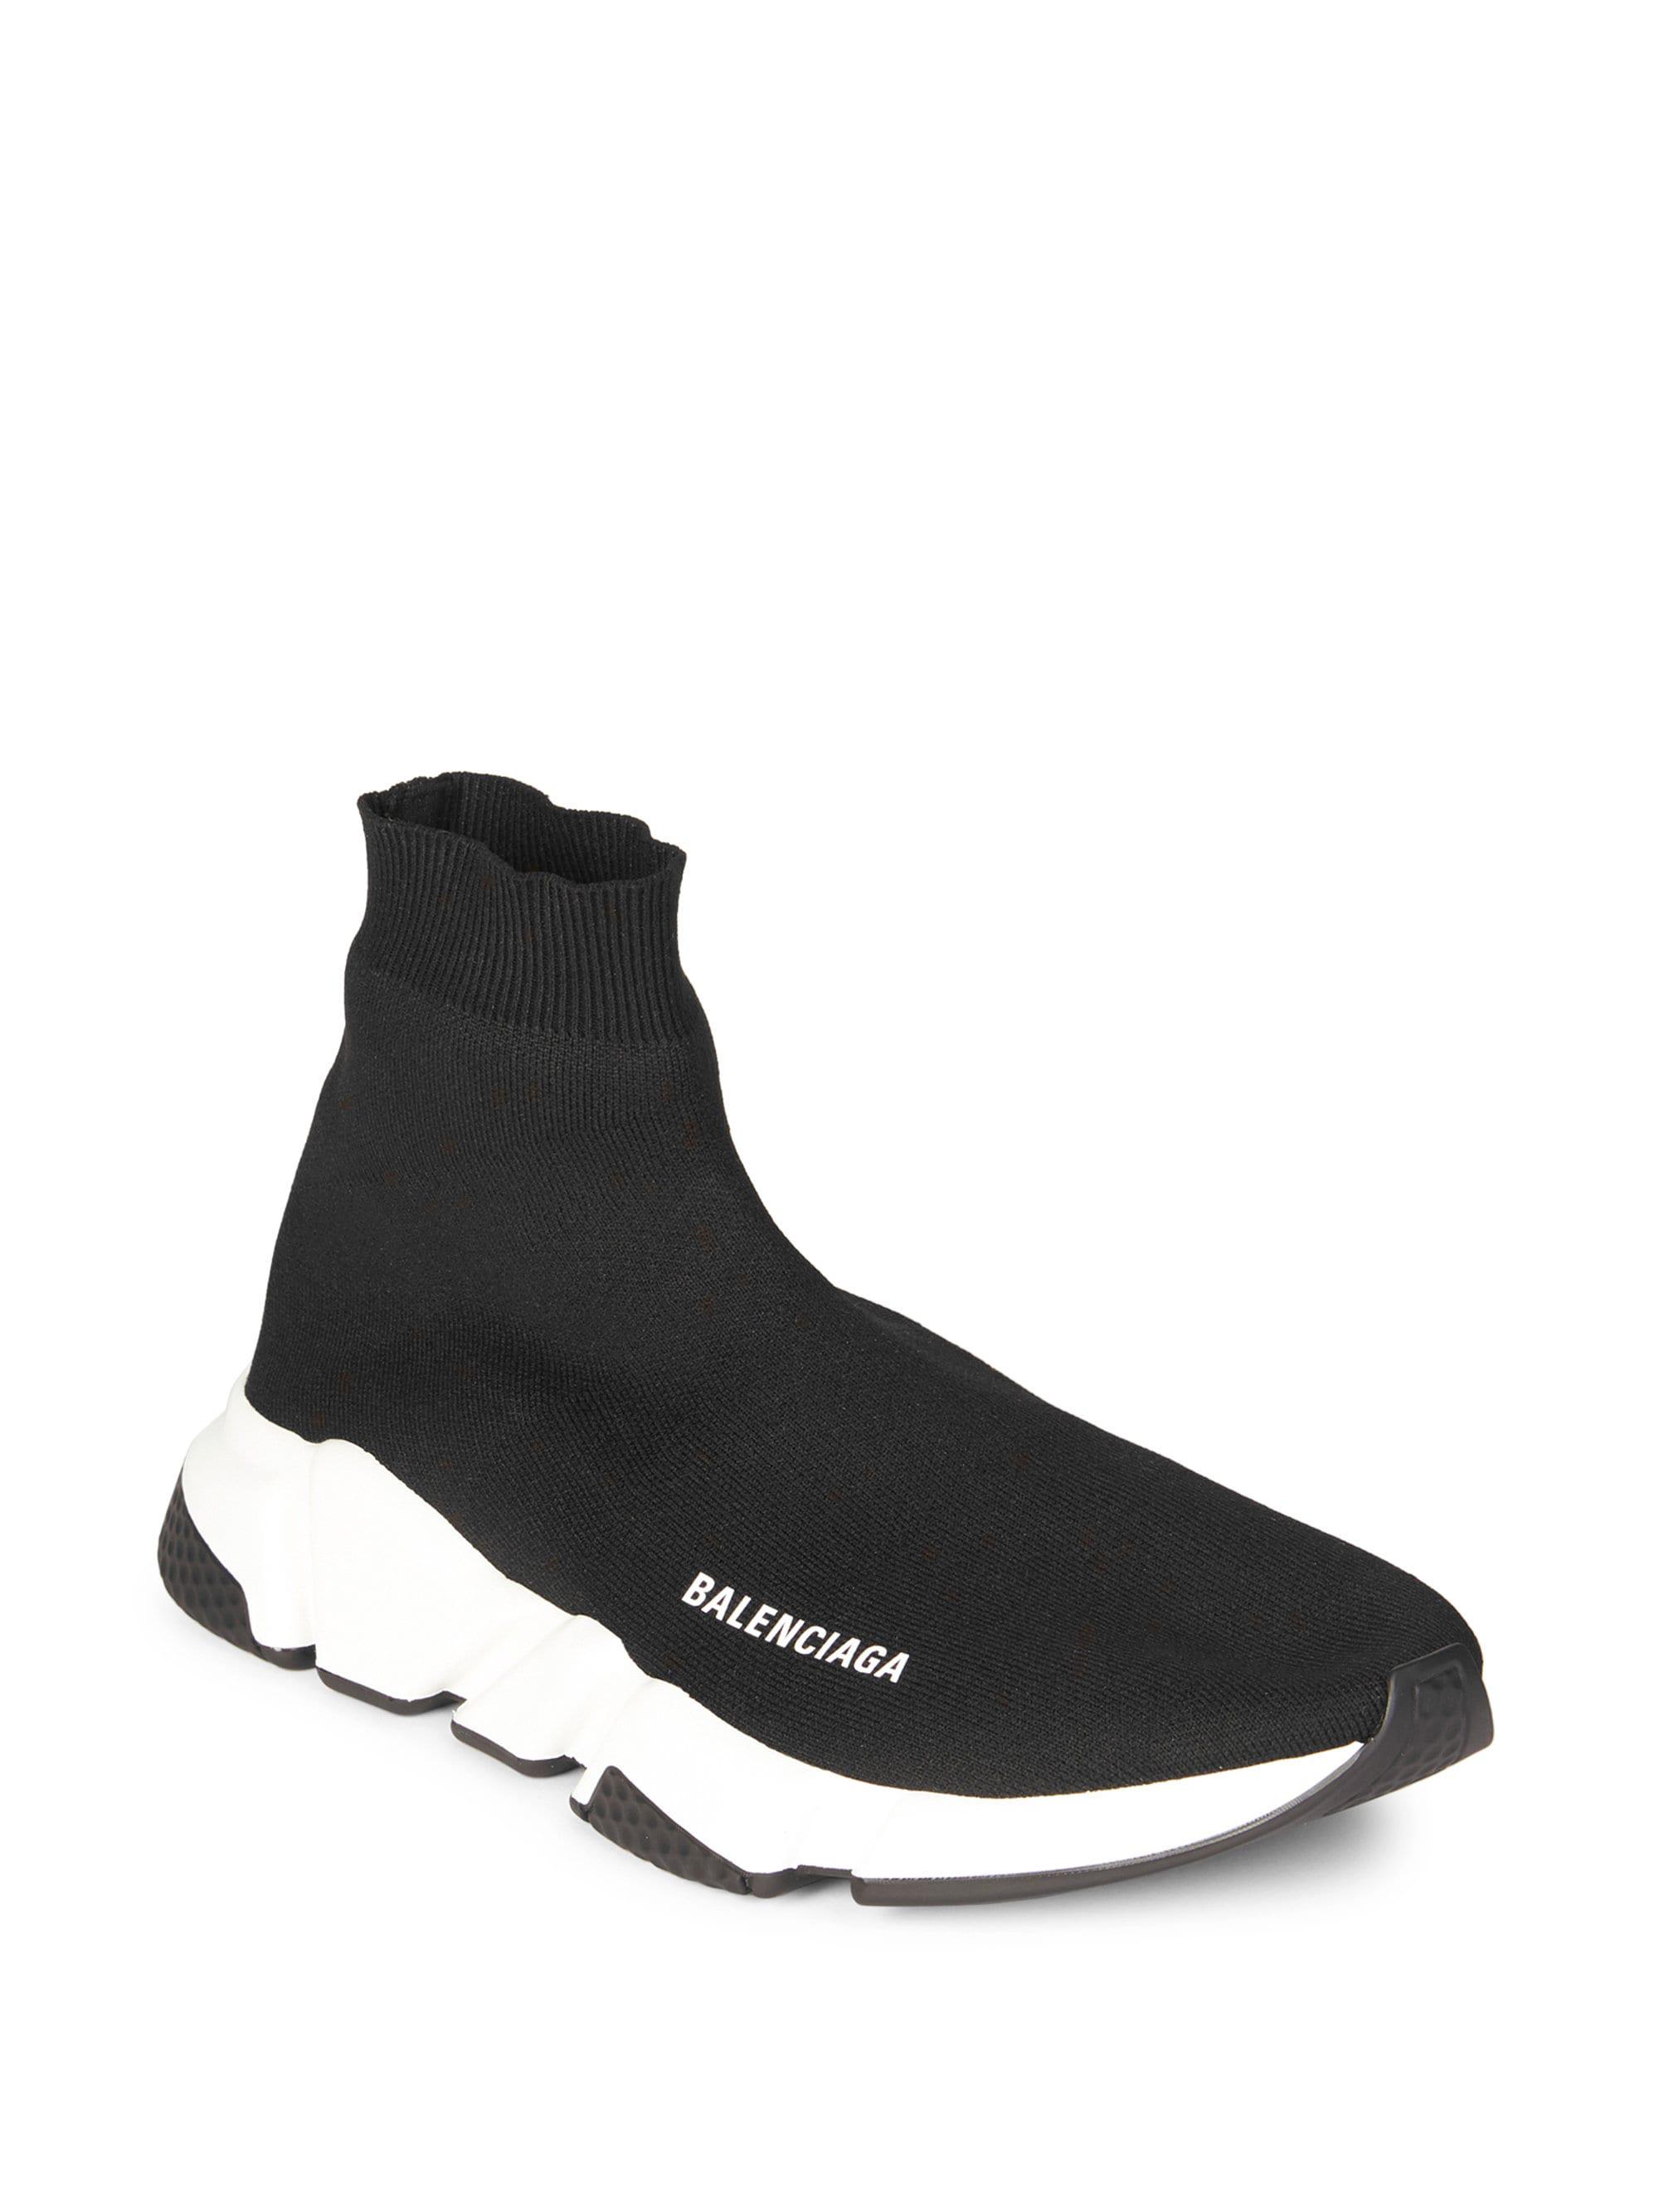 Balenciaga Speed Sneakers in Black for Men - Save 17% - Lyst